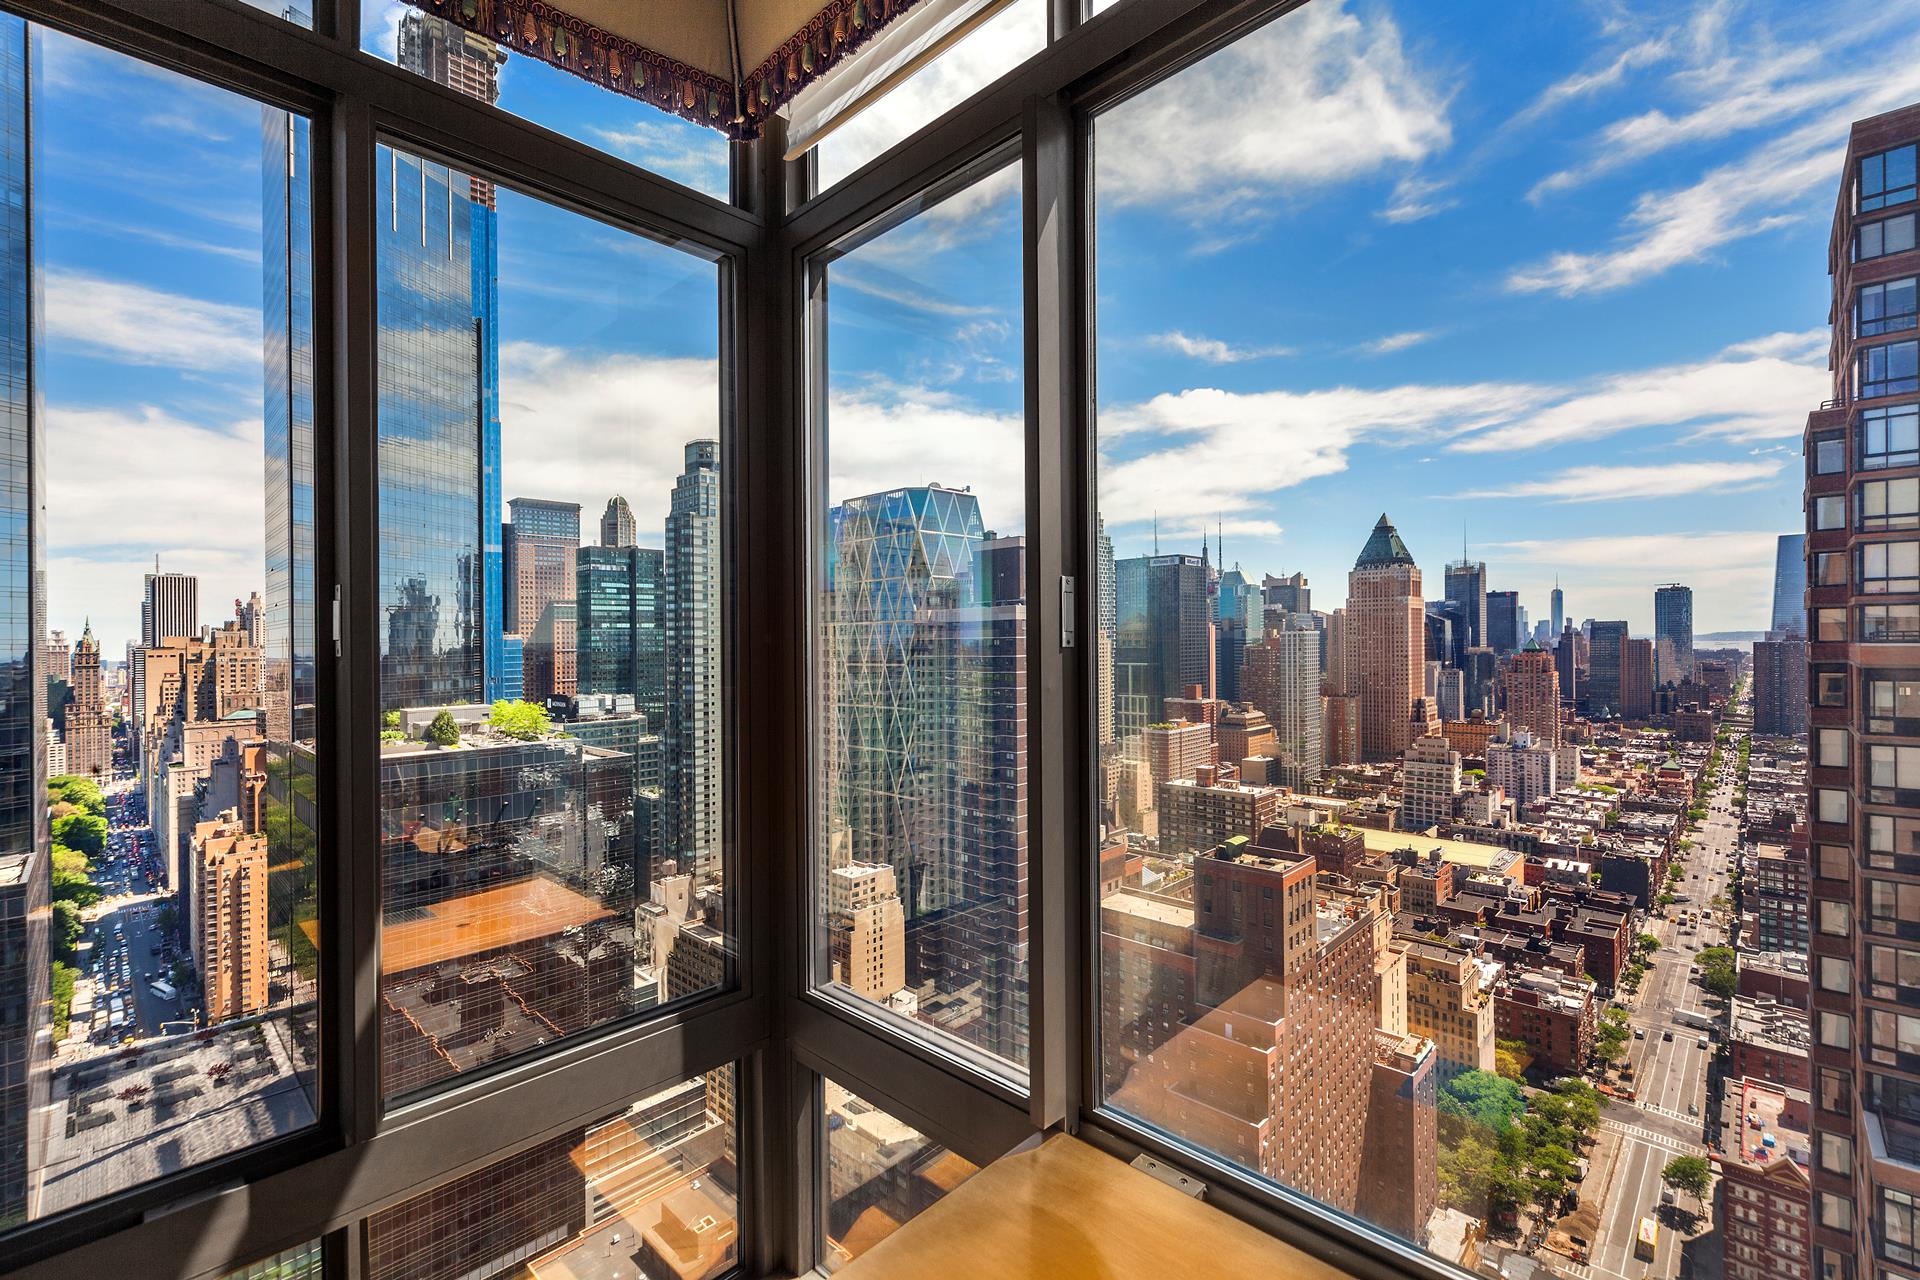 2 Columbus Avenue Phc, Lincoln Sq, Upper West Side, NYC - 2 Bedrooms  
2.5 Bathrooms  
5 Rooms - 